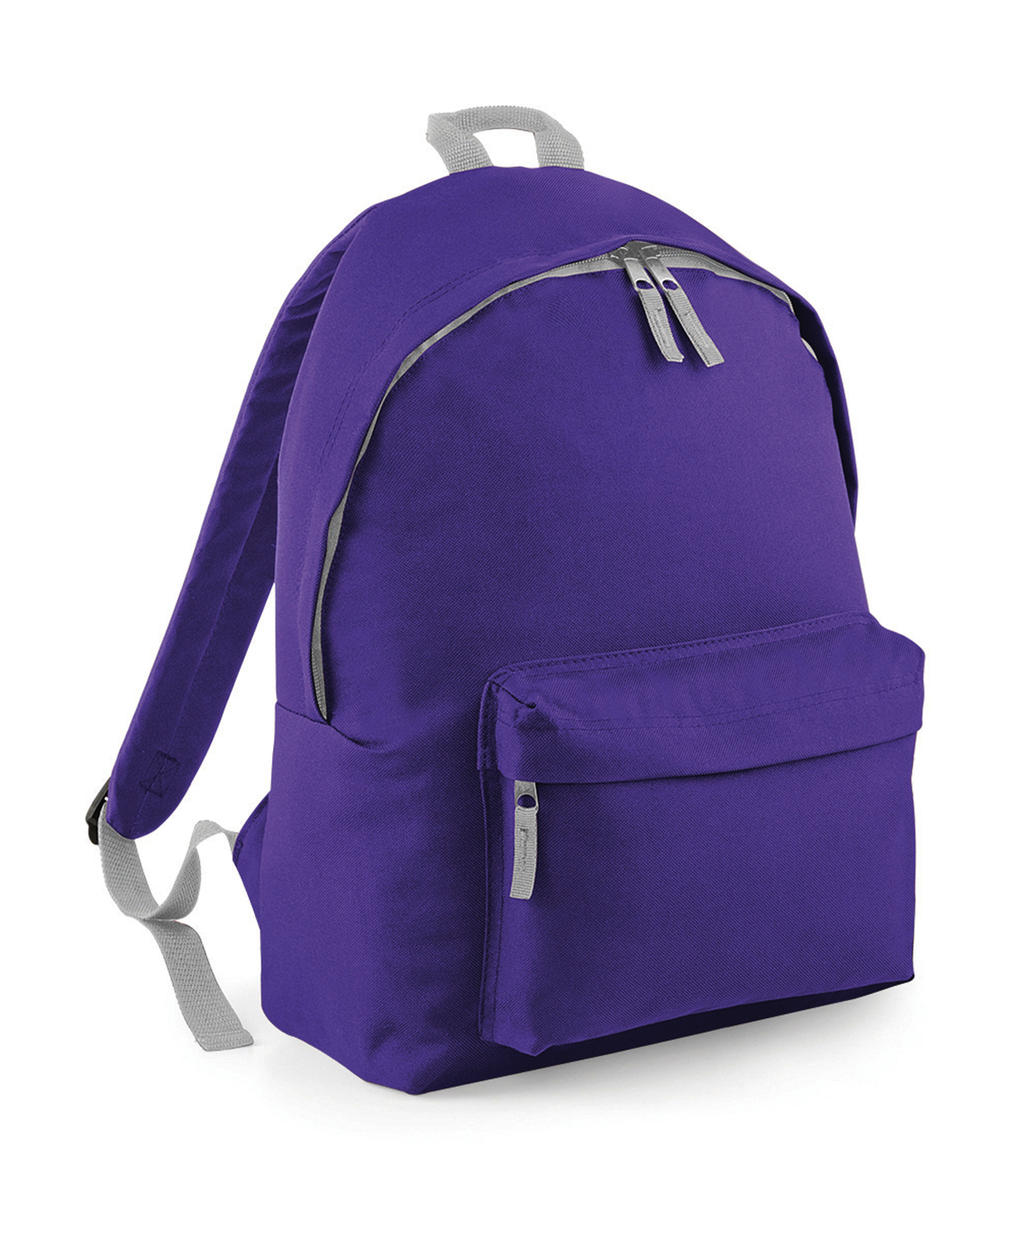  Junior Fashion Backpack in Farbe Purple/Light Grey